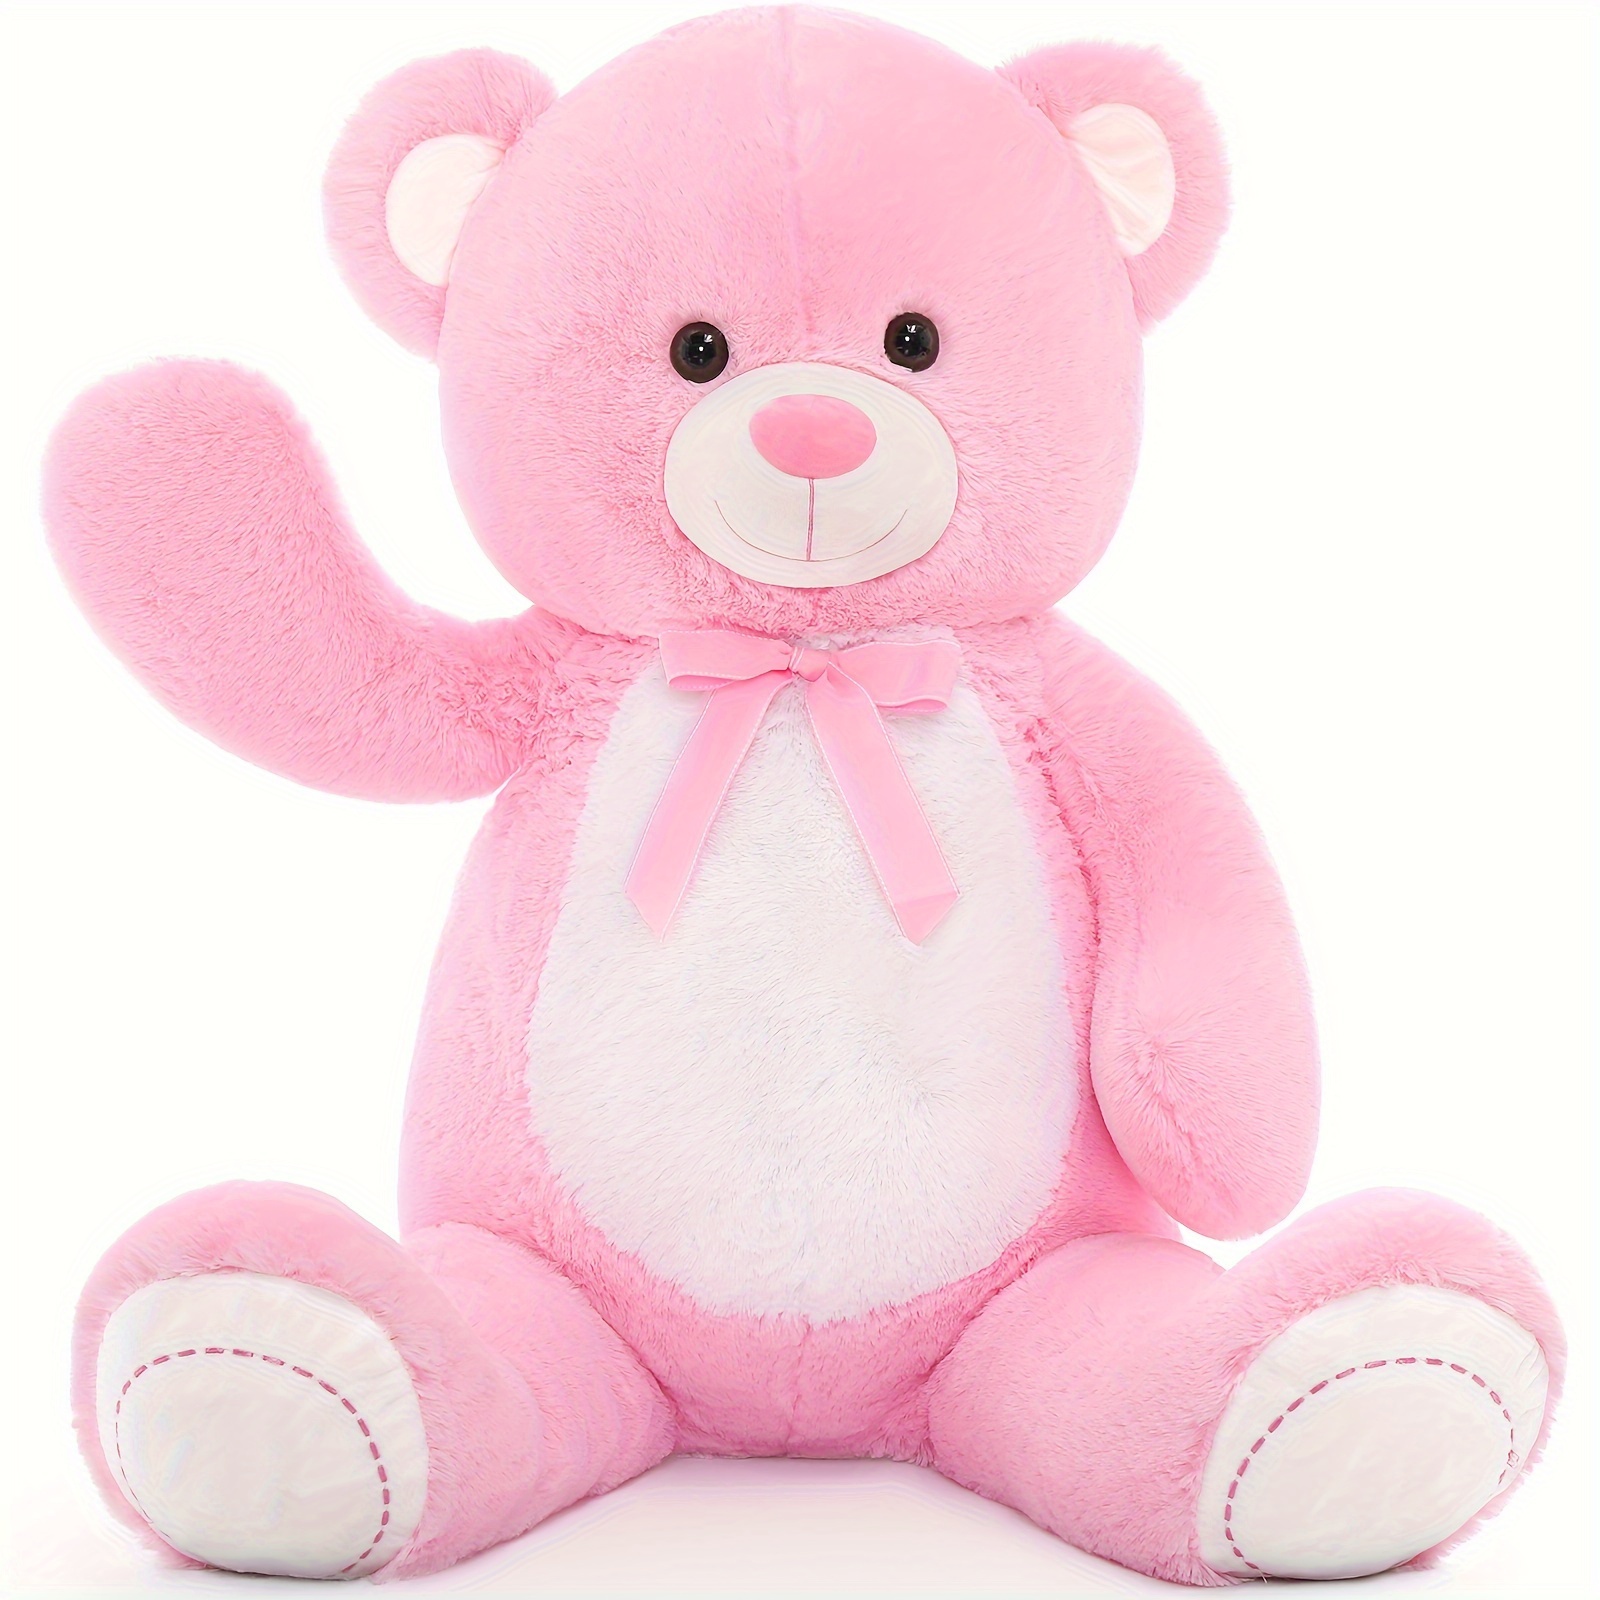 

Pink Giant Teddy Bear 52", Human Size Big Teddy Bear Stuffed Animal 4.3ft With White Belly, Plush Teddy Bear Valentines Day Gift For Girlfriend Kids